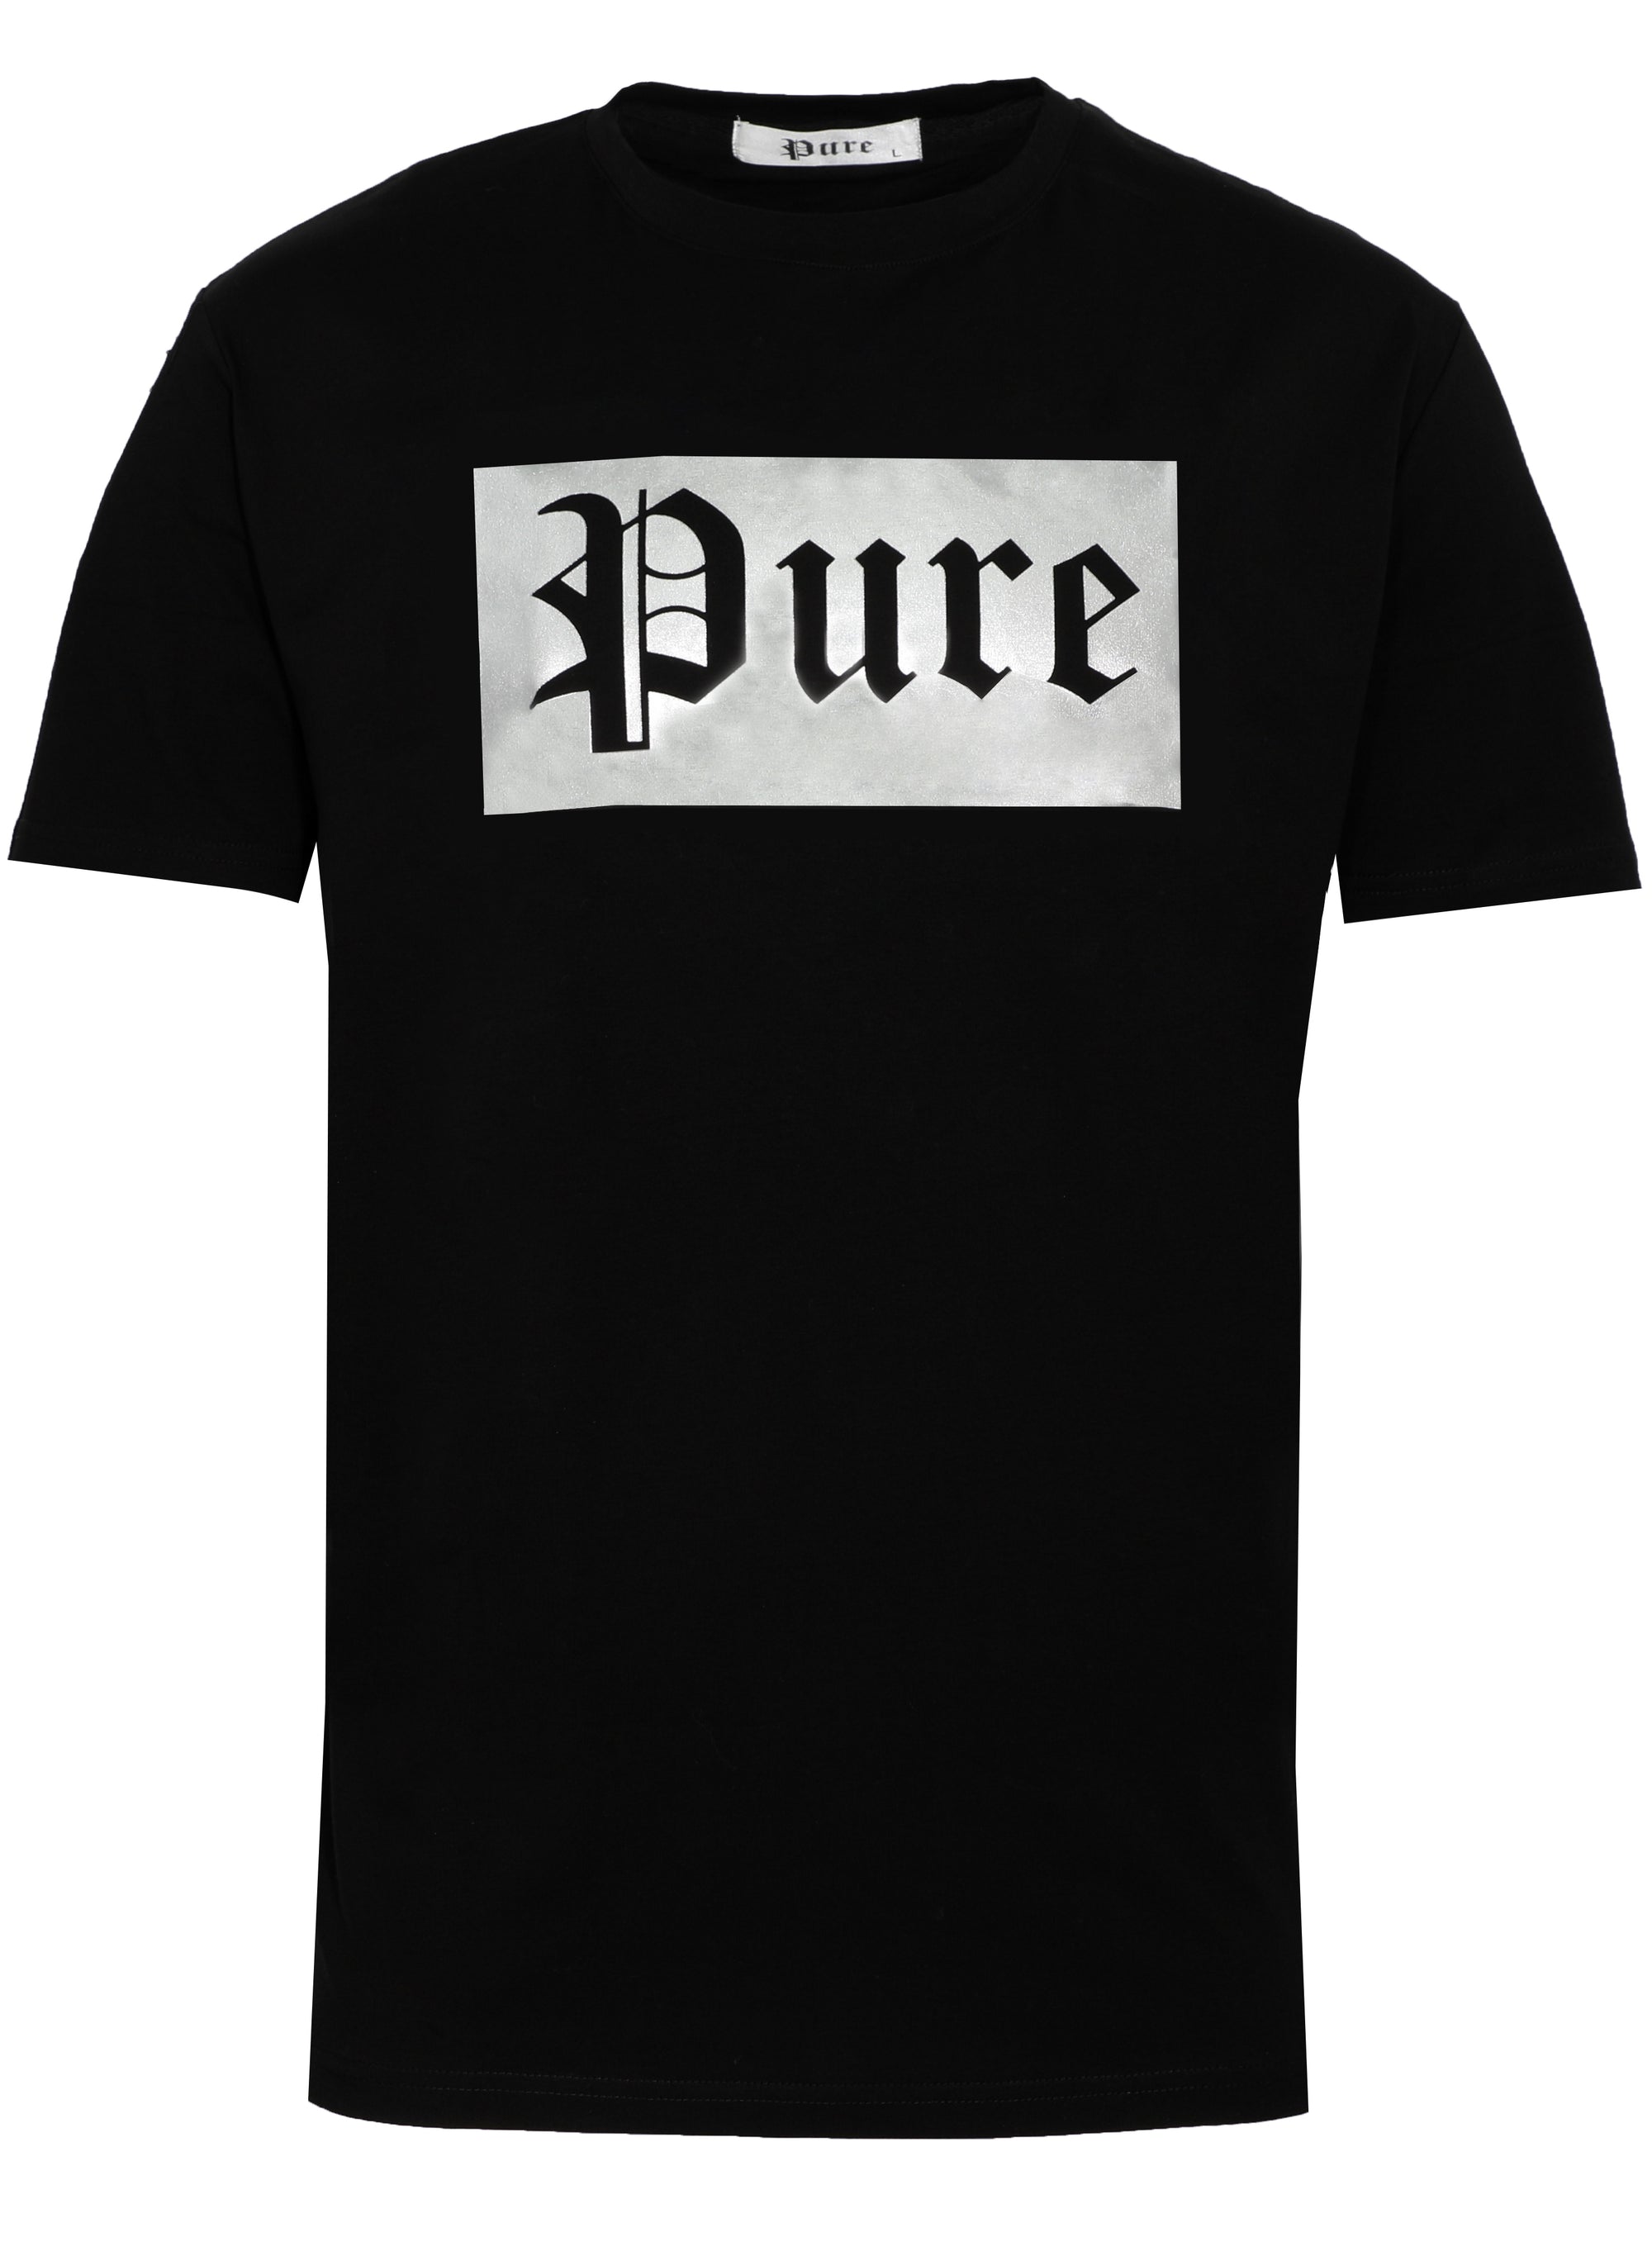 Black Logo Tee with Silver Pure Logo